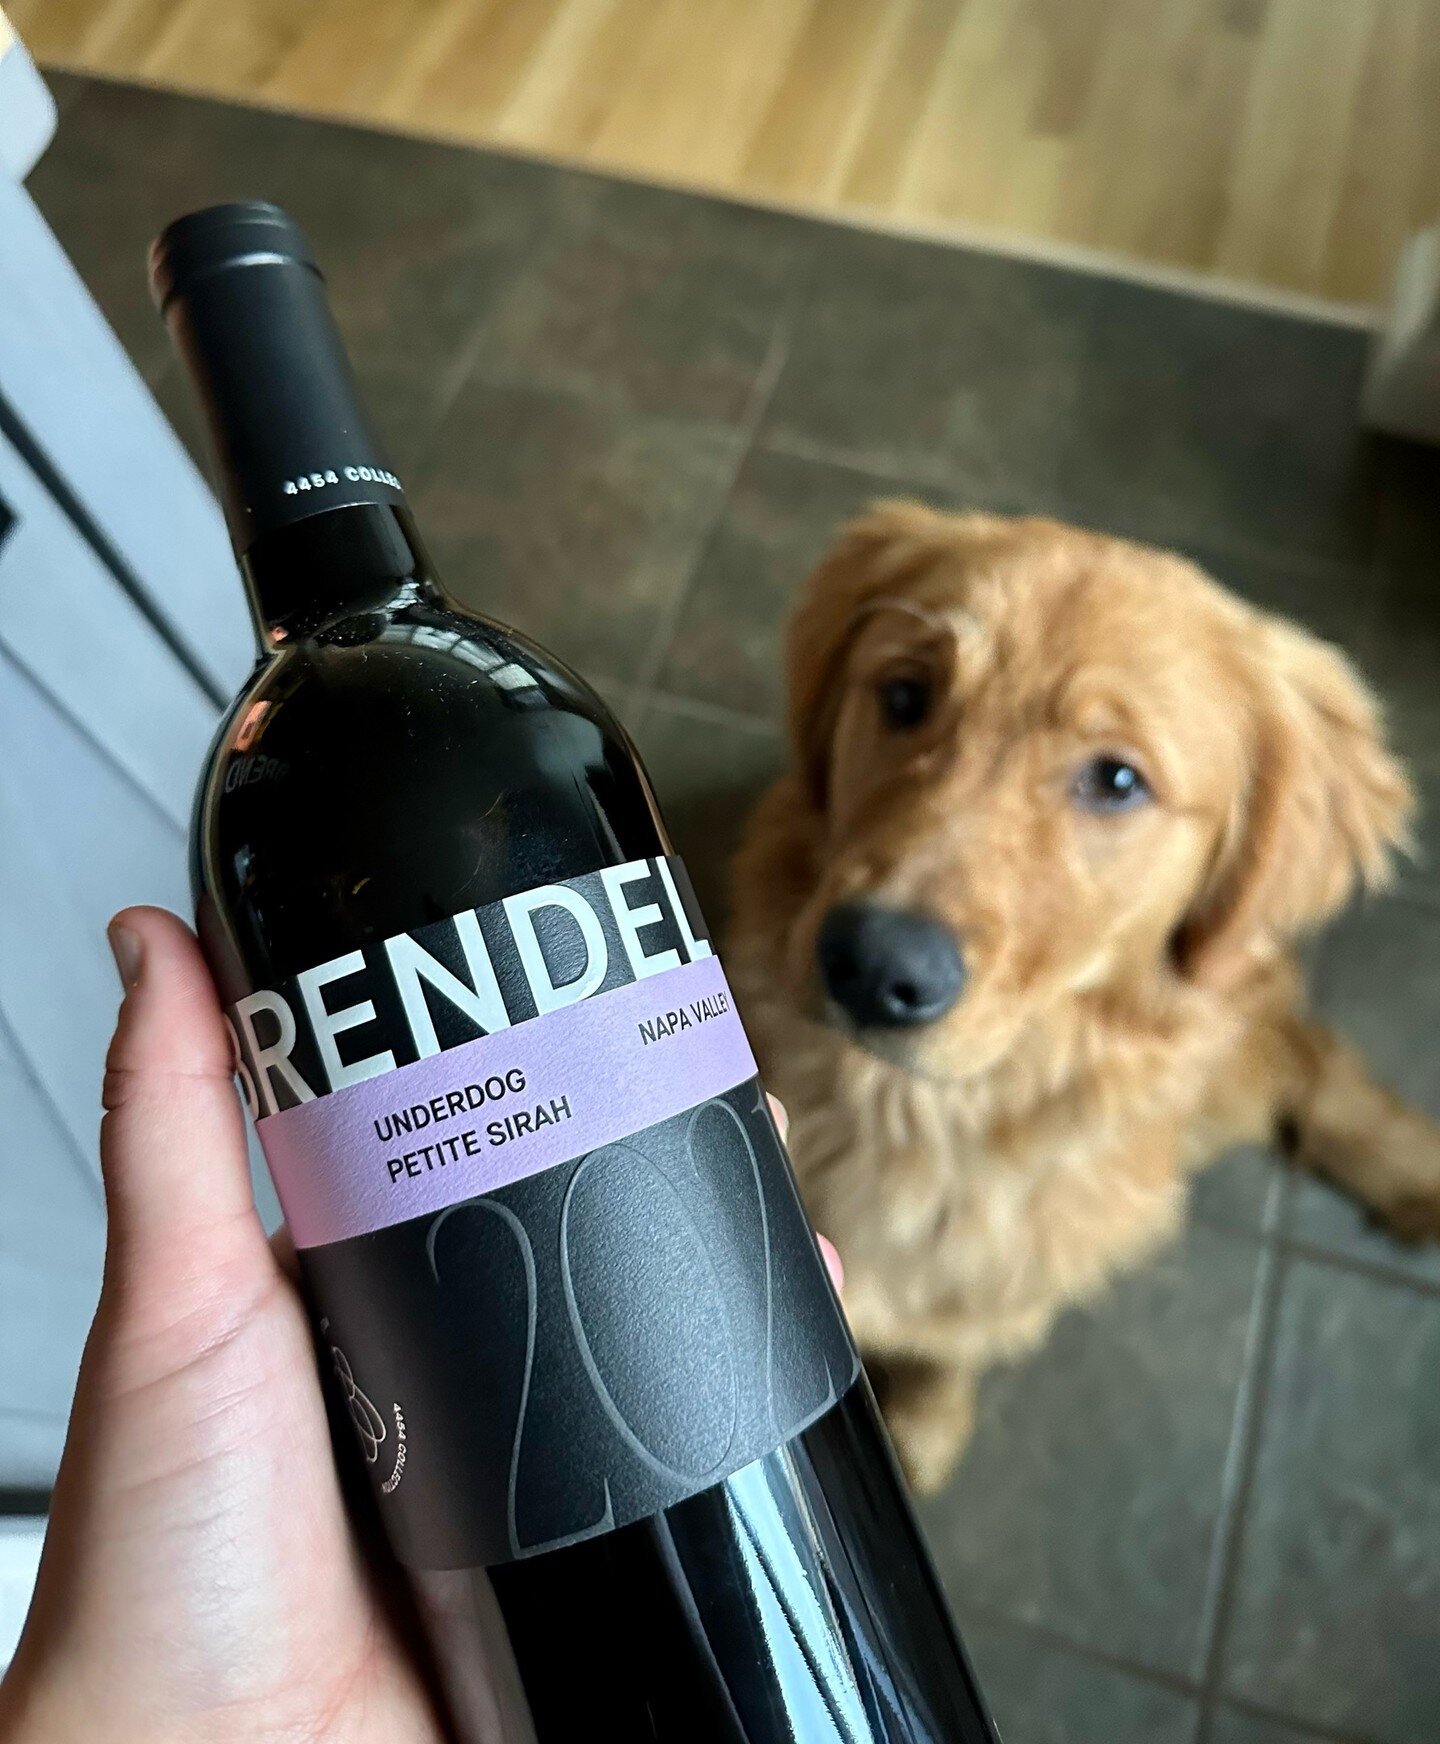 Tonight's plans: Bringing home a bottle of Brendel, popping it open, and settling in for a movie night with your best dog friend.🍇